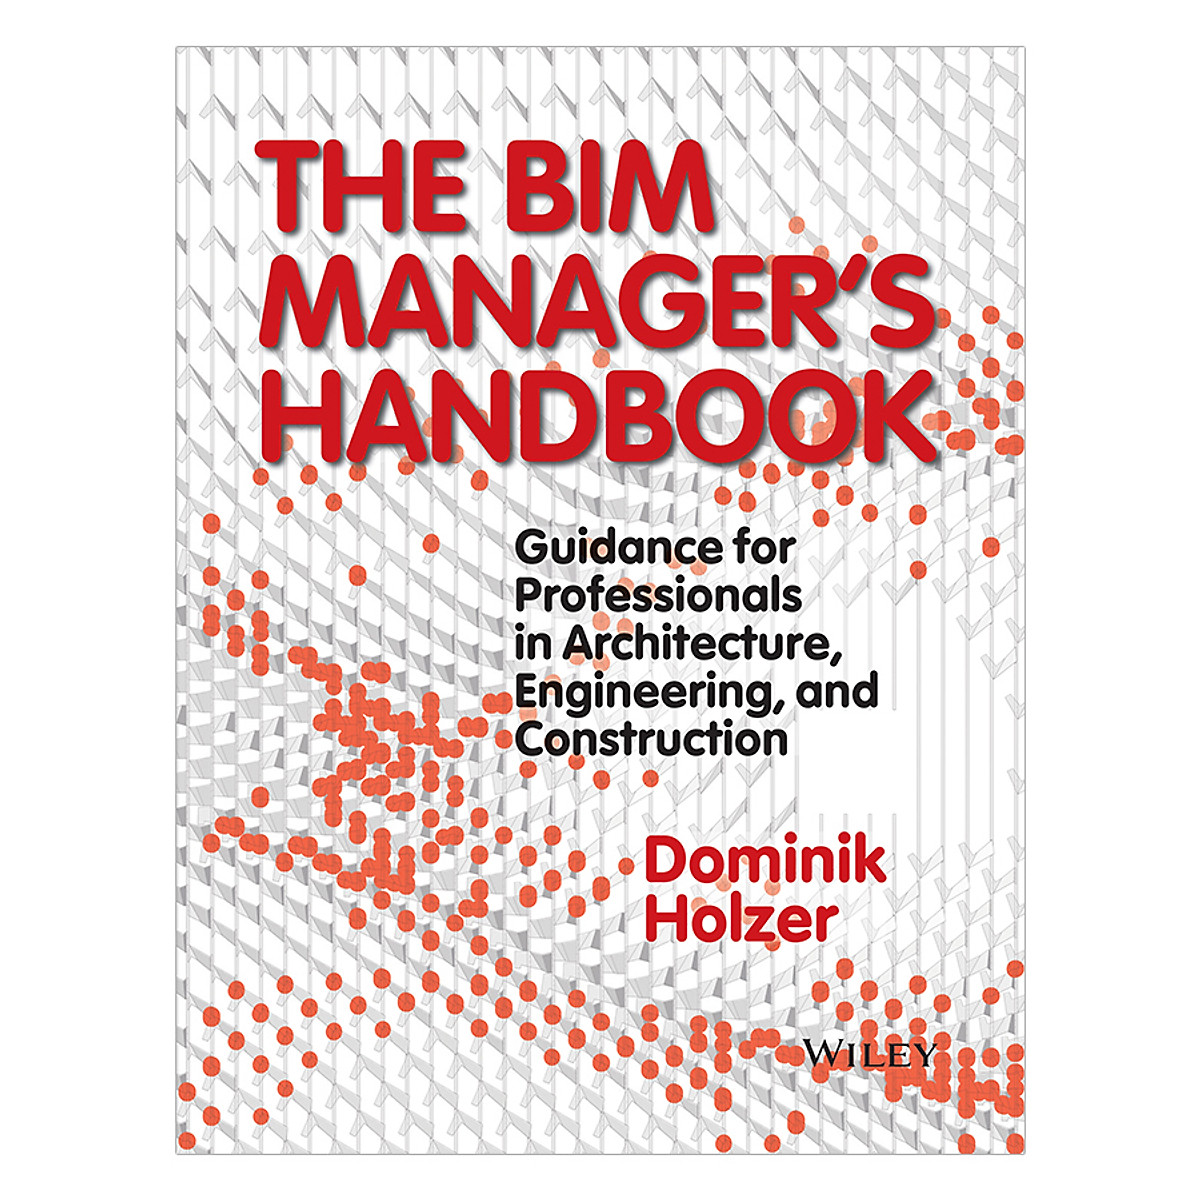 The BIM Manager's Handbook - Guidance For Professionals In Architecture, Engineering And Cconstruction